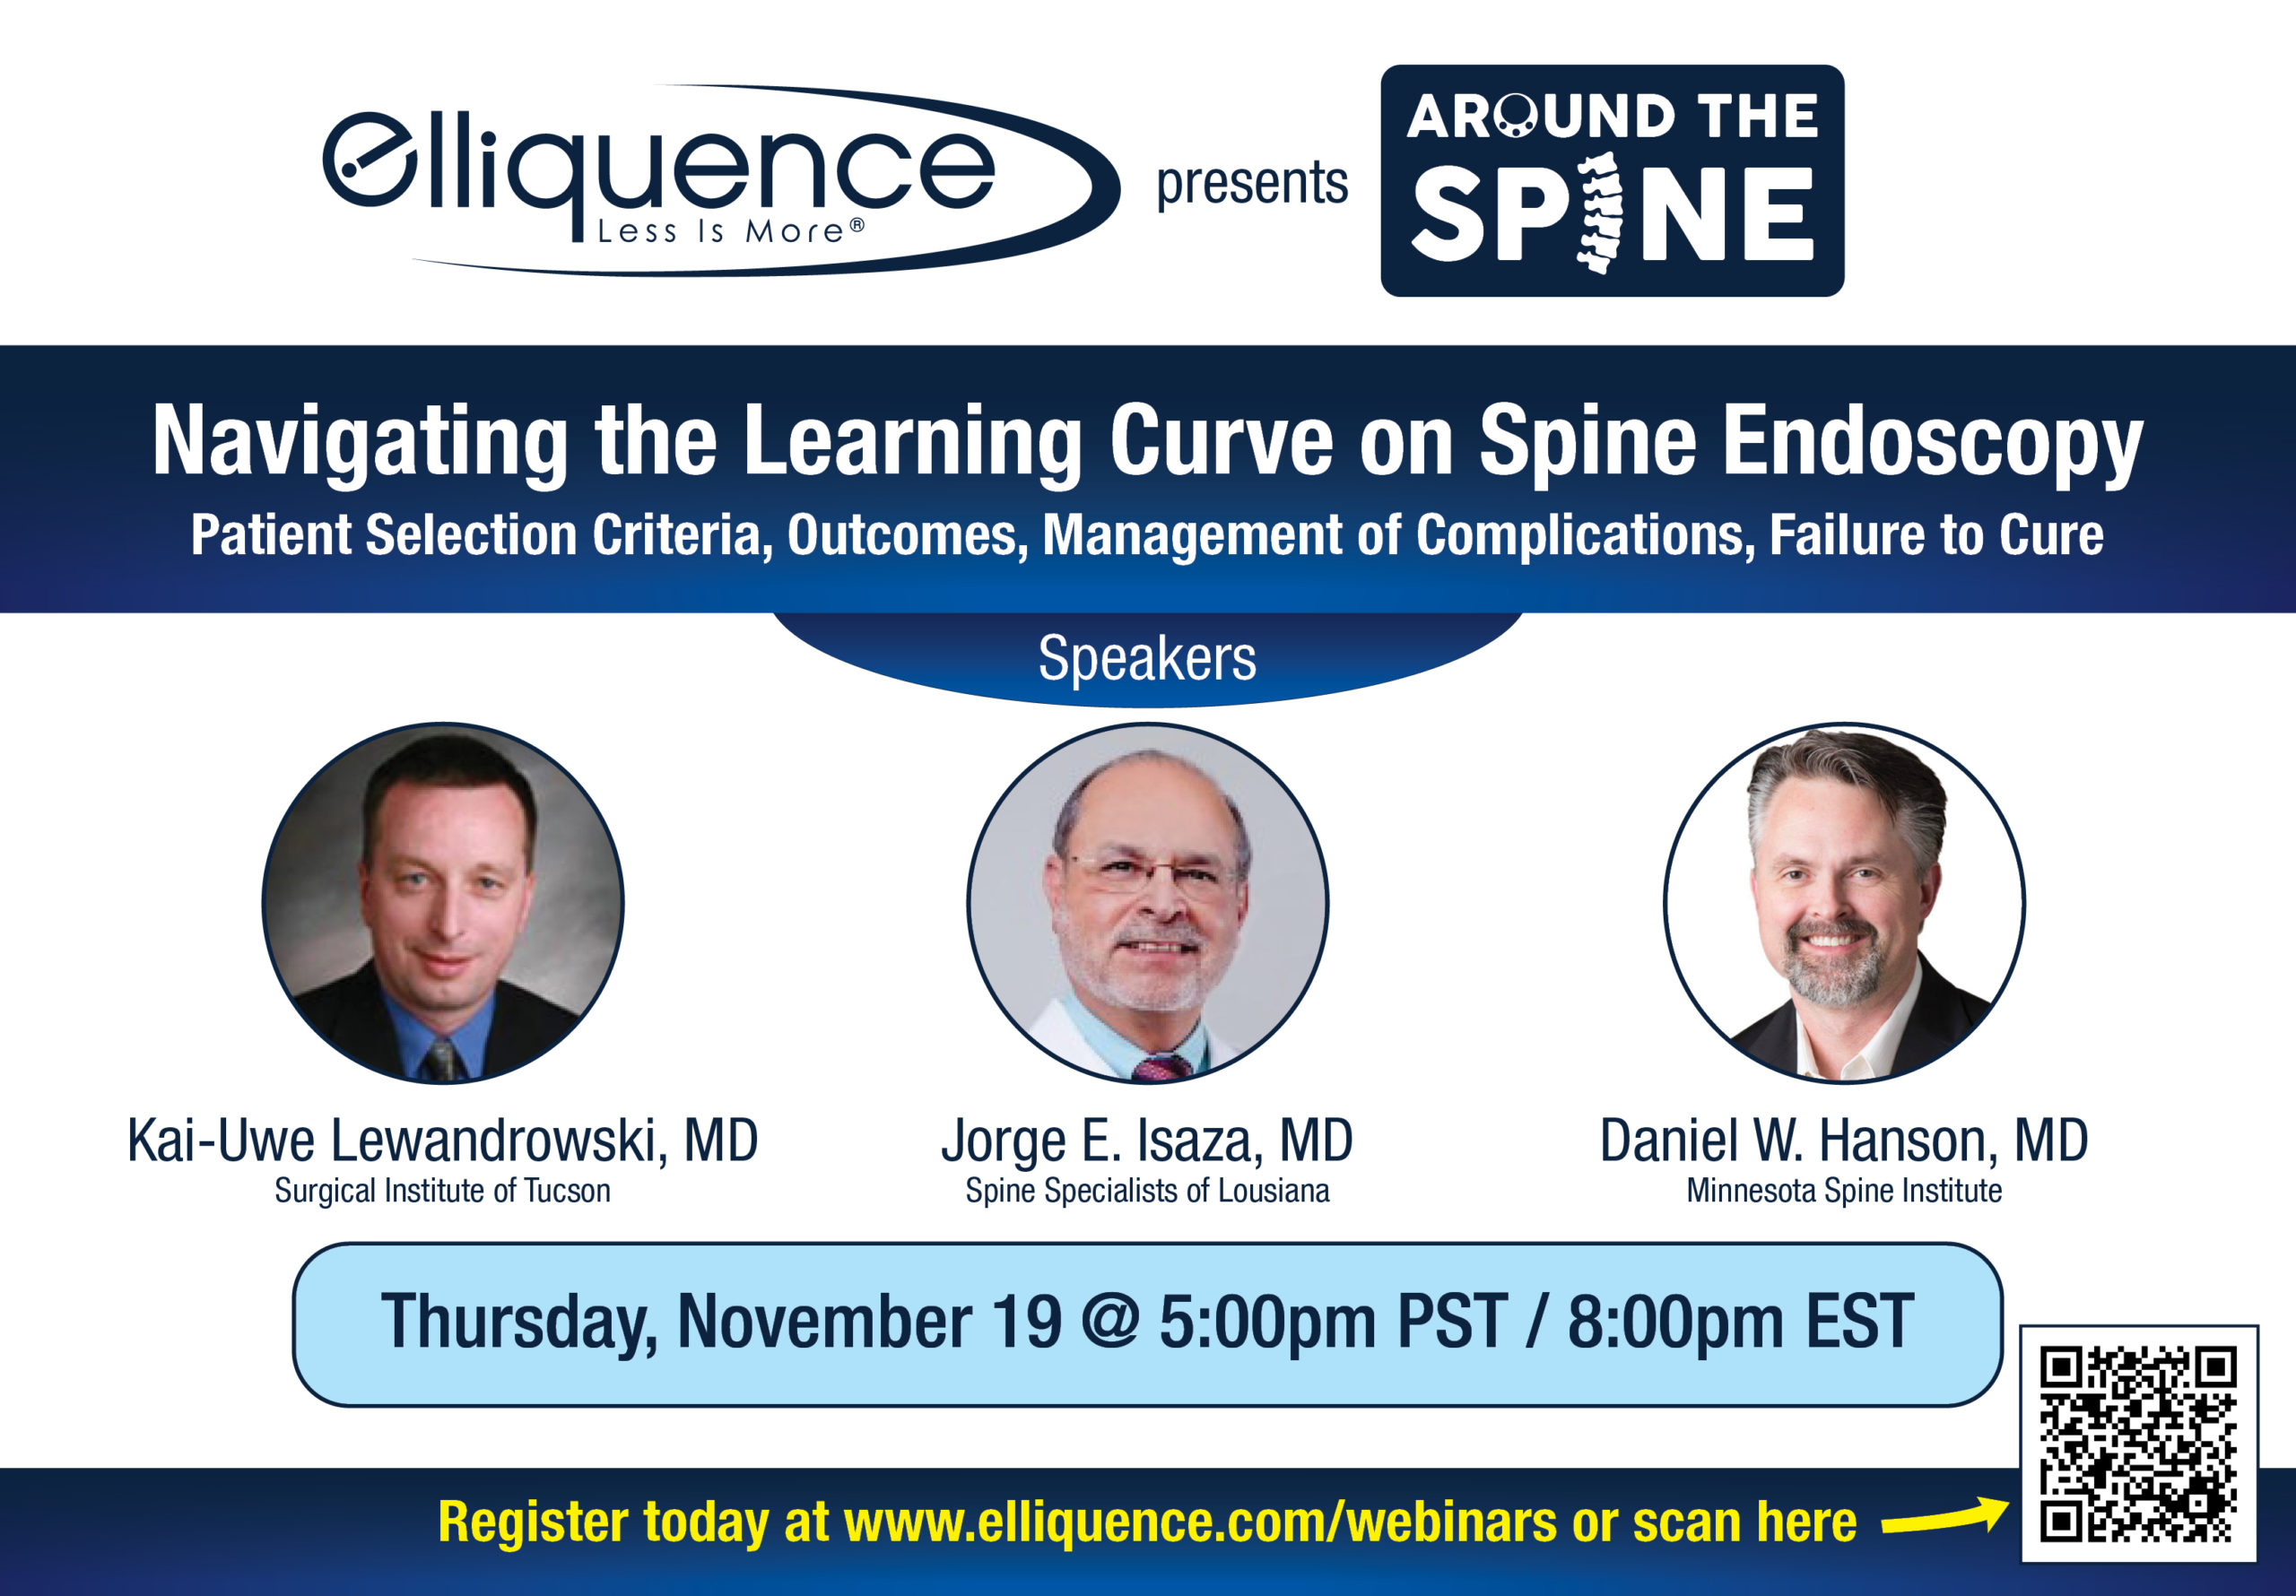 Navigating the Learning Curve on Spine Endoscopy